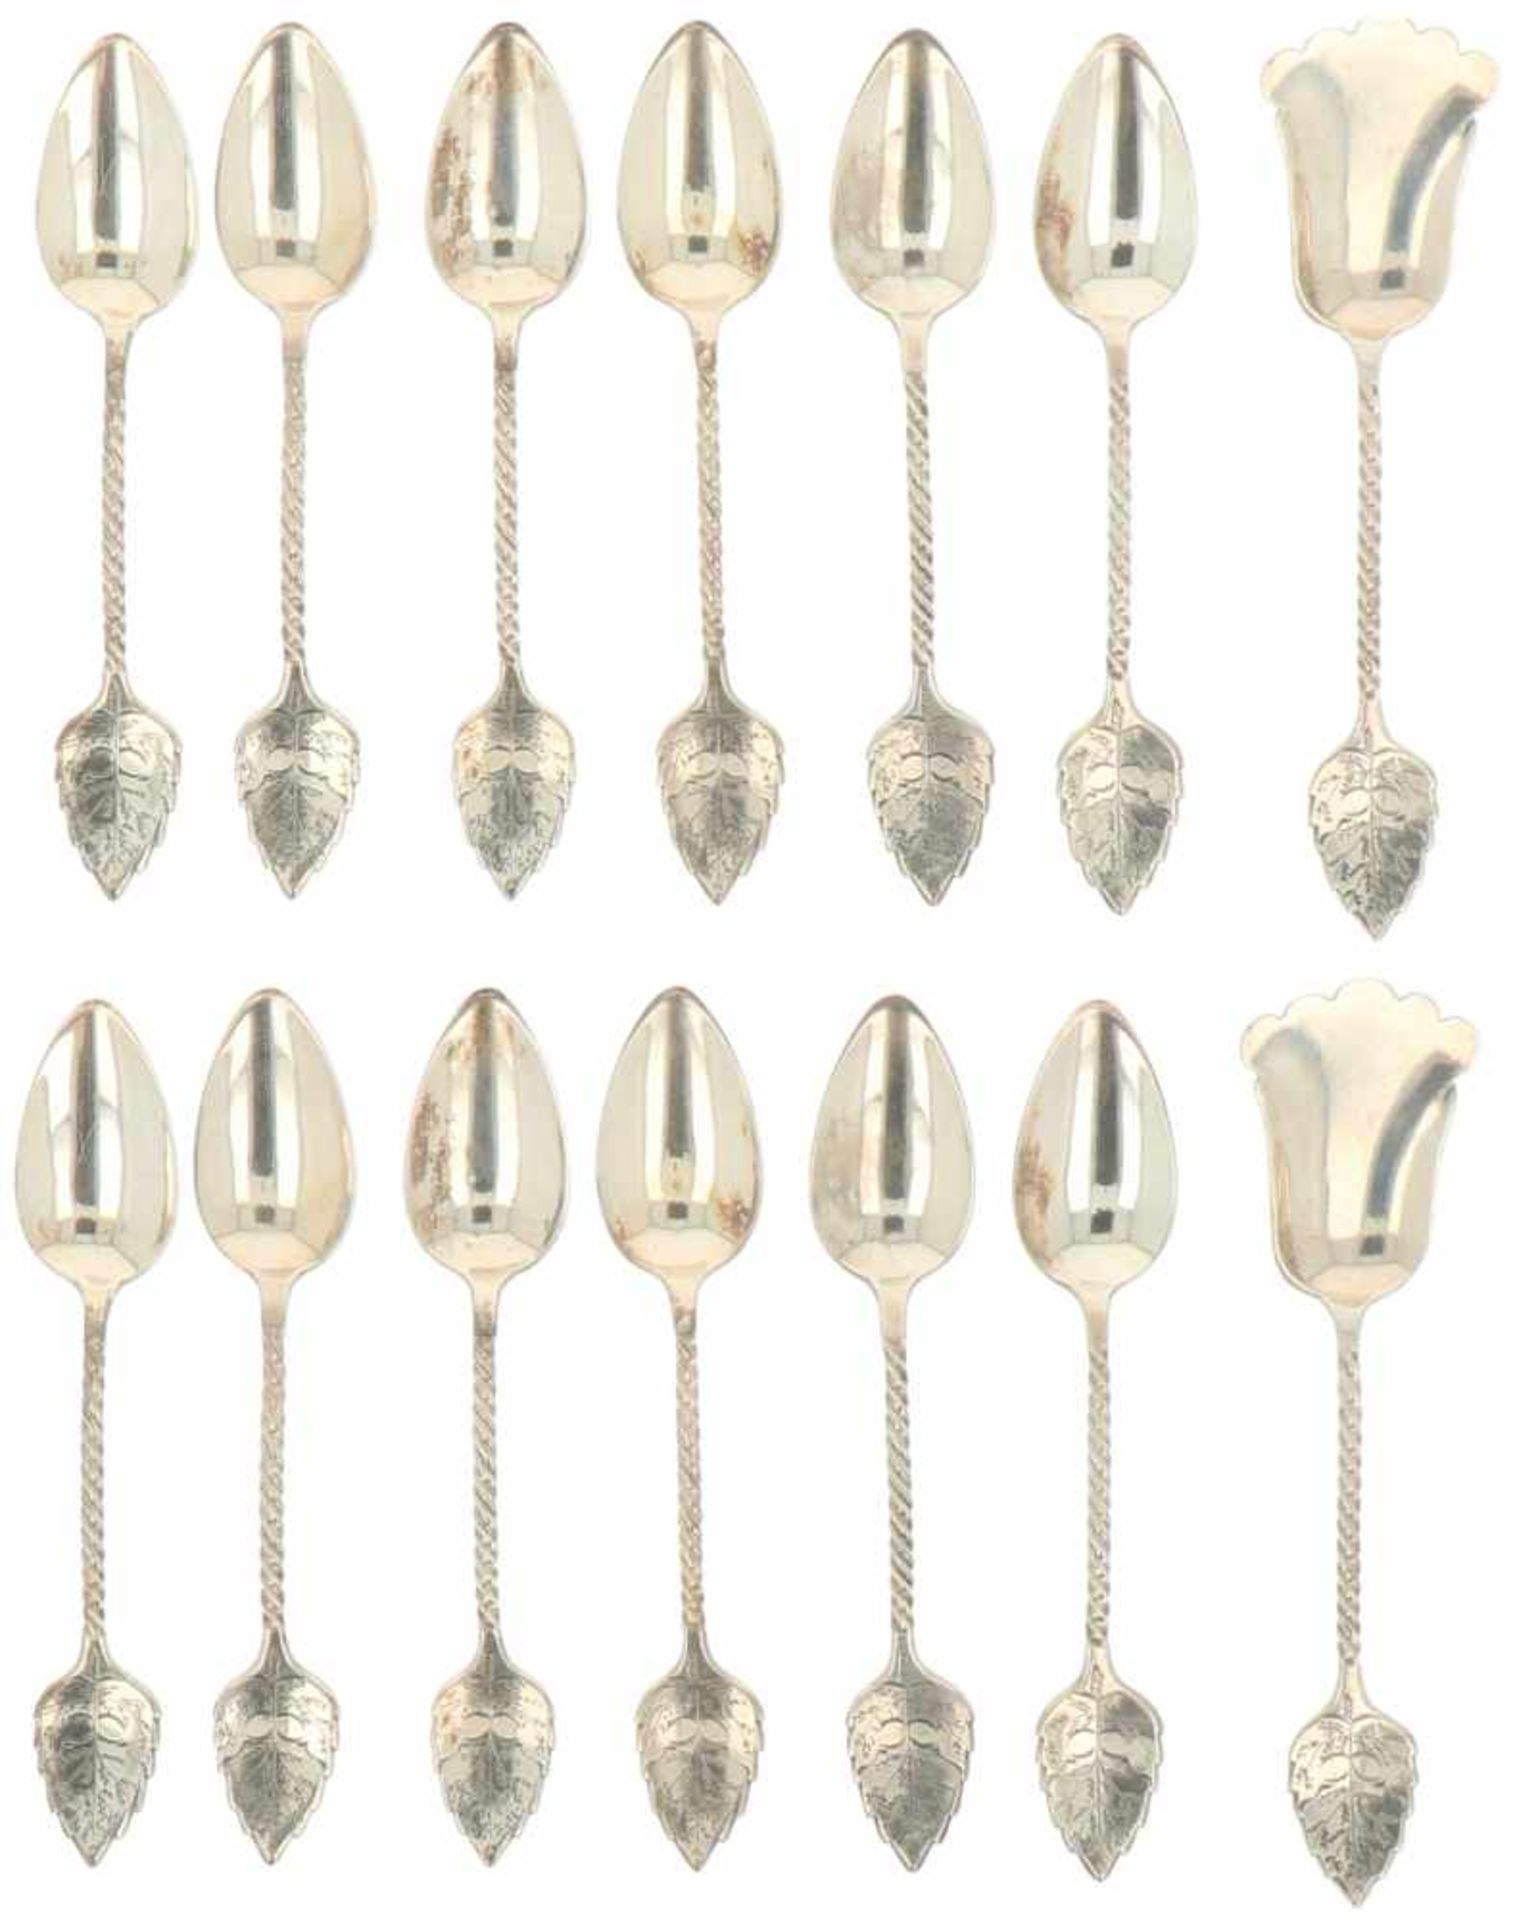 (14) Piece set of silver coffee spoons.